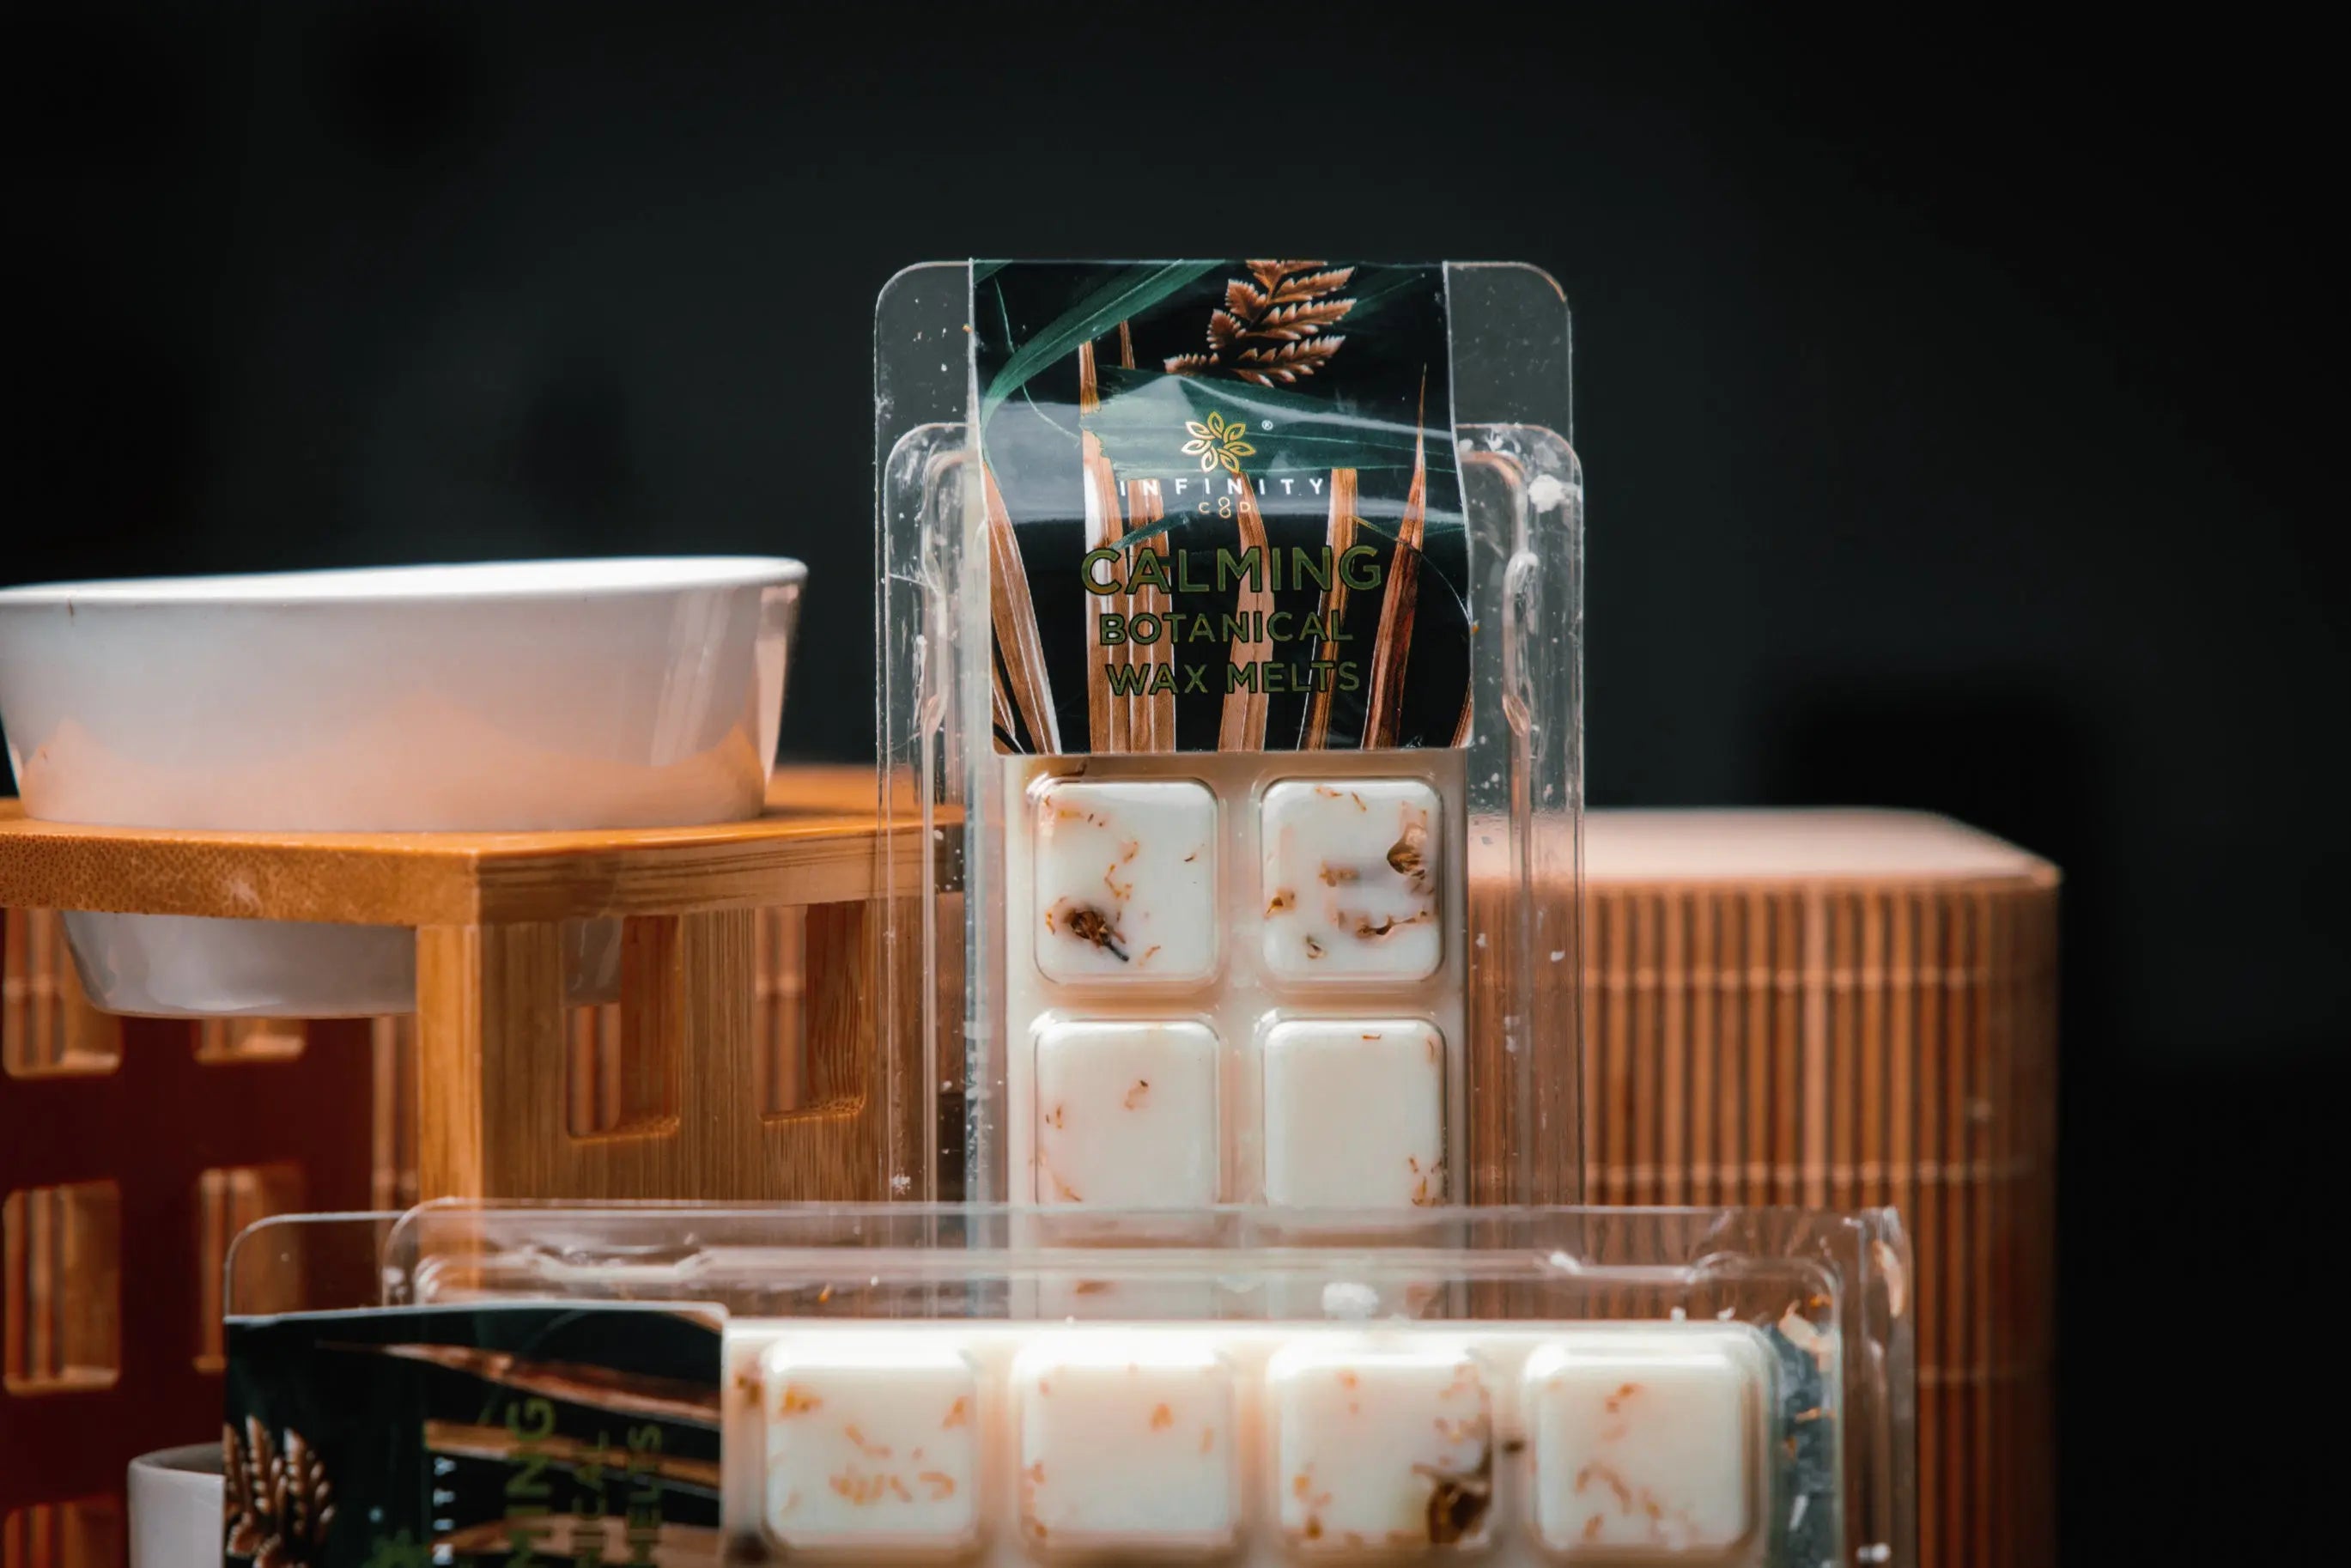 Essential oil wax melt burner cbd wax melts A white ceramic essential oil burner with a dish on top, surrounded by botanicals. A lit tea light candle can be seen beneath